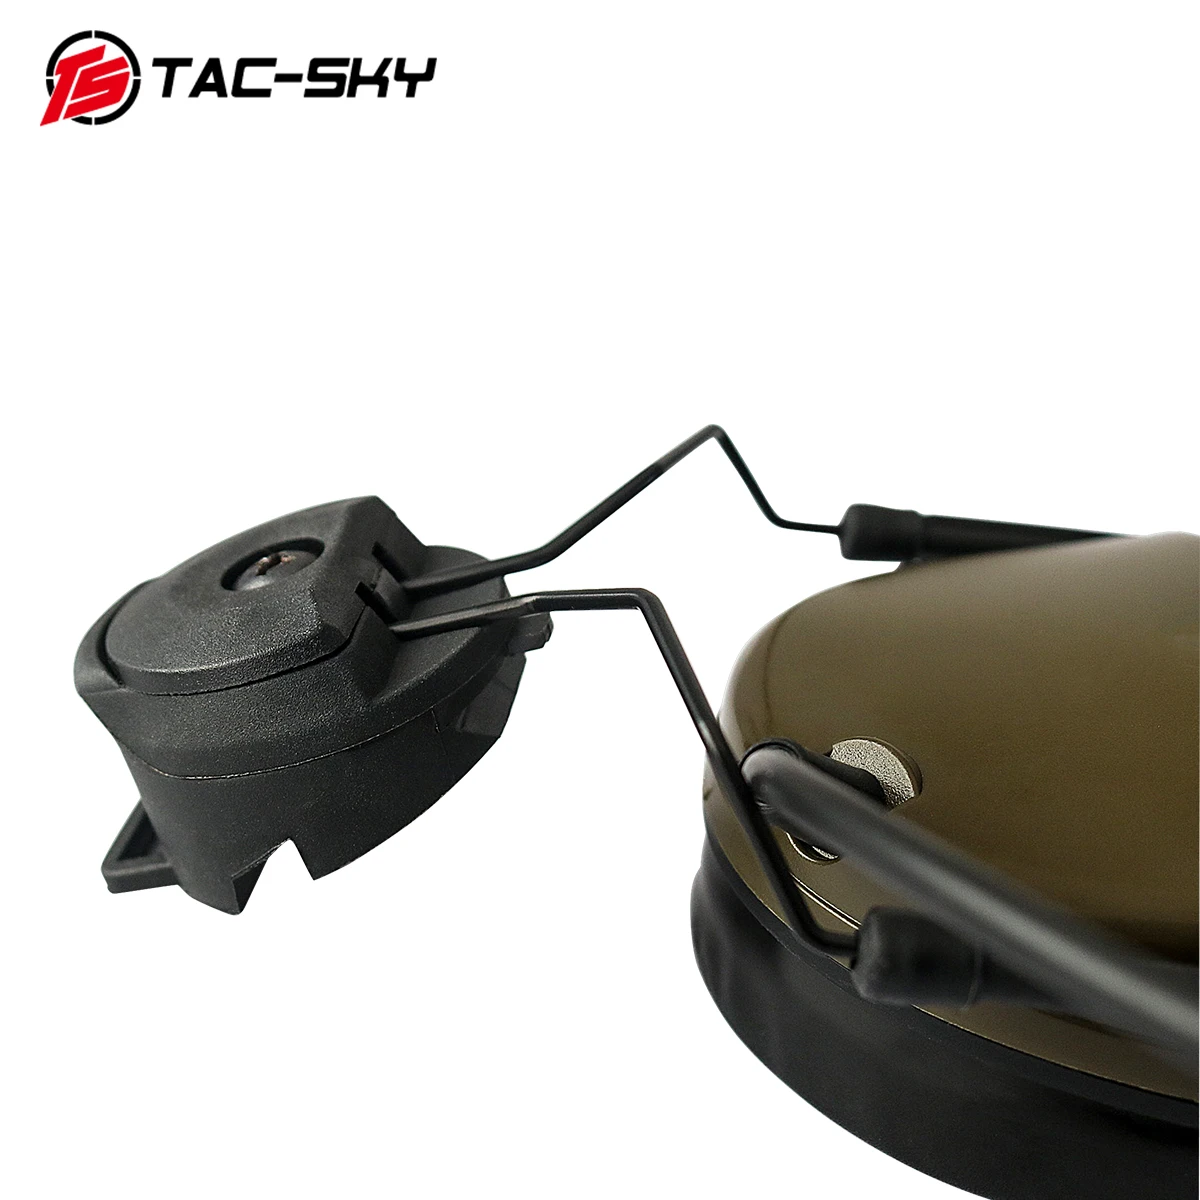 TAC-SKY helmet bracket headset COMTAC III silicone earmuff version outdoor hunting sports noise reduction tactical headset FG